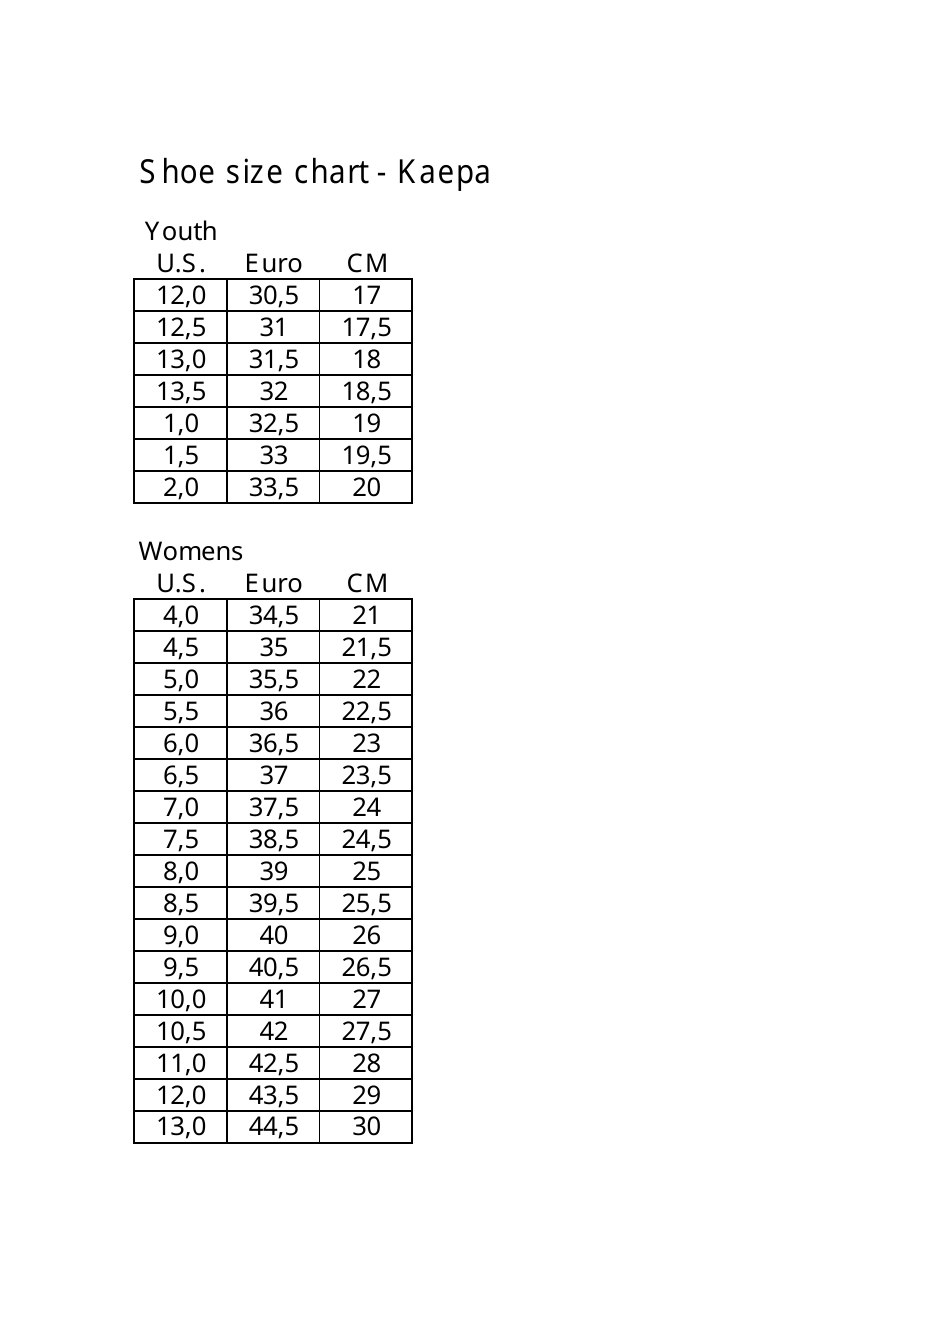 Sample Youth and Women Shoe Size Chart 